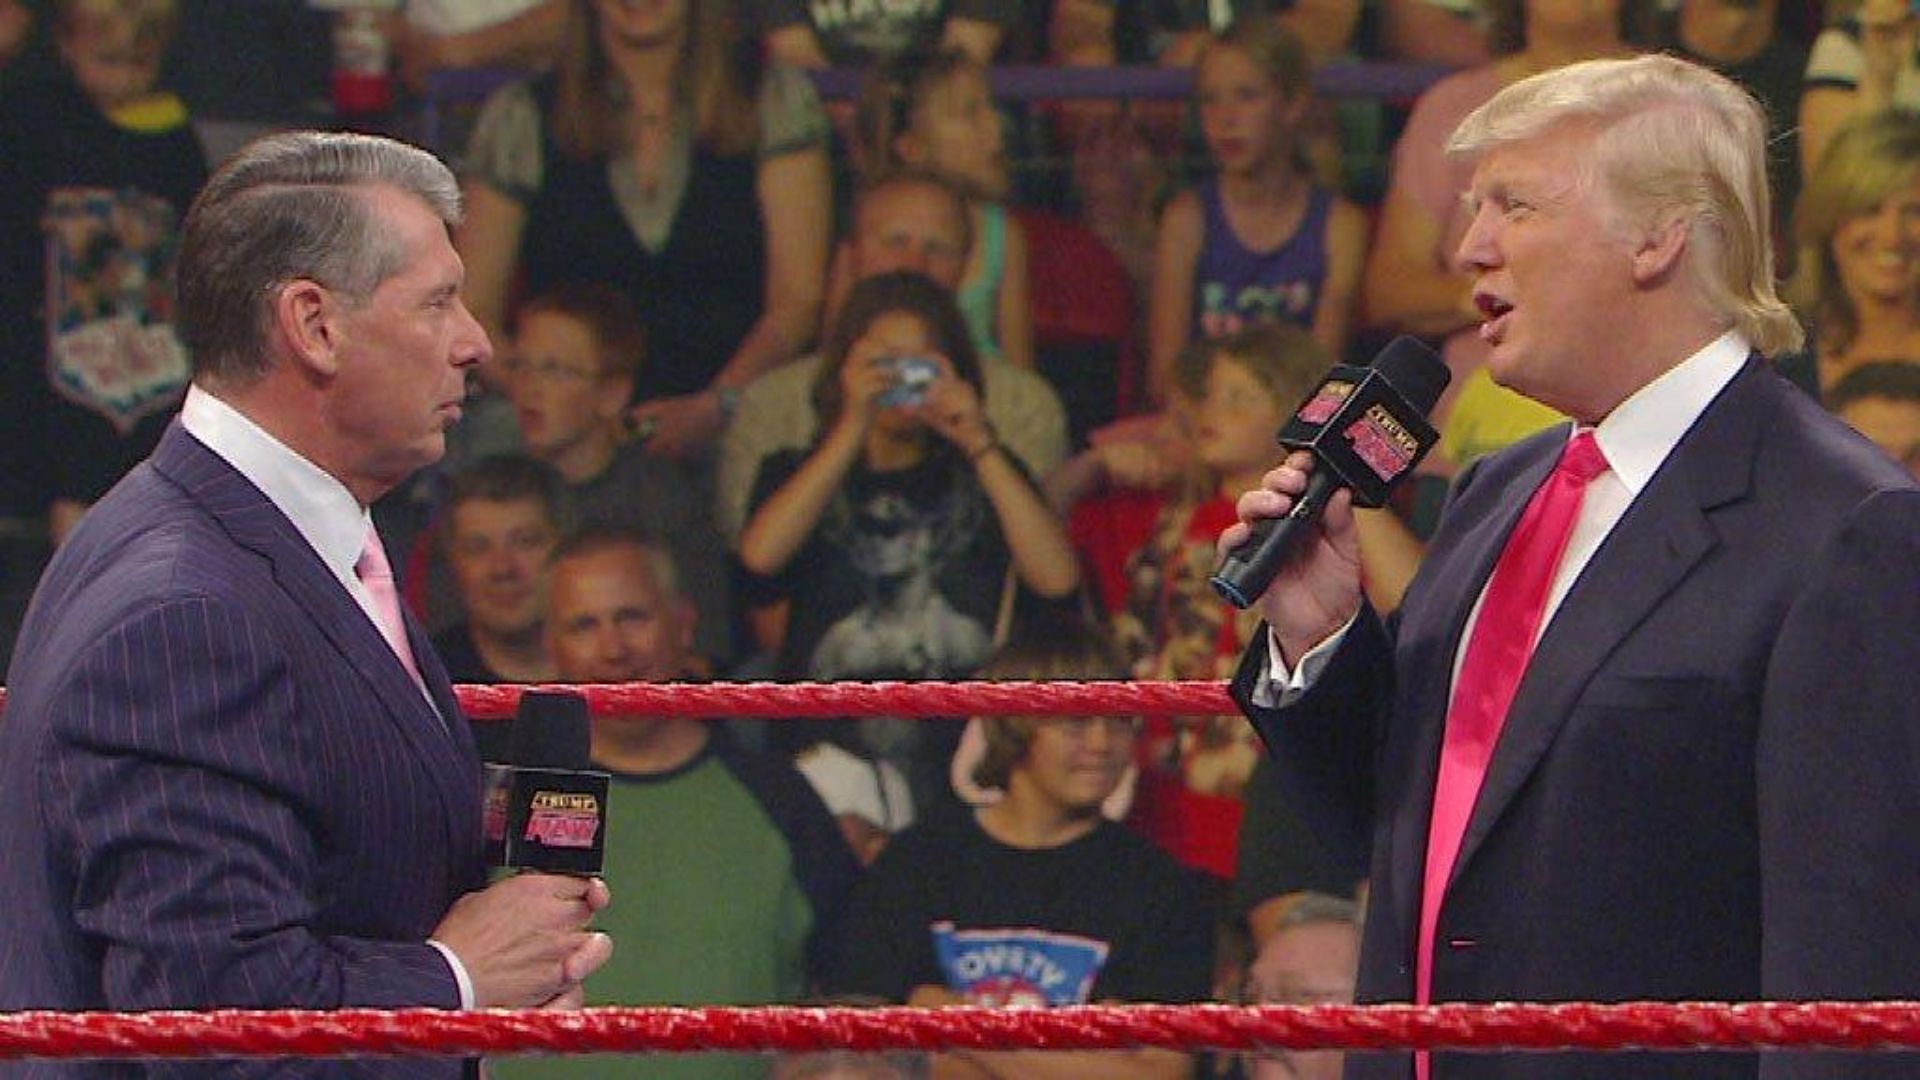 The former US President had a spell in WWE with Mr McMahon in 2007.